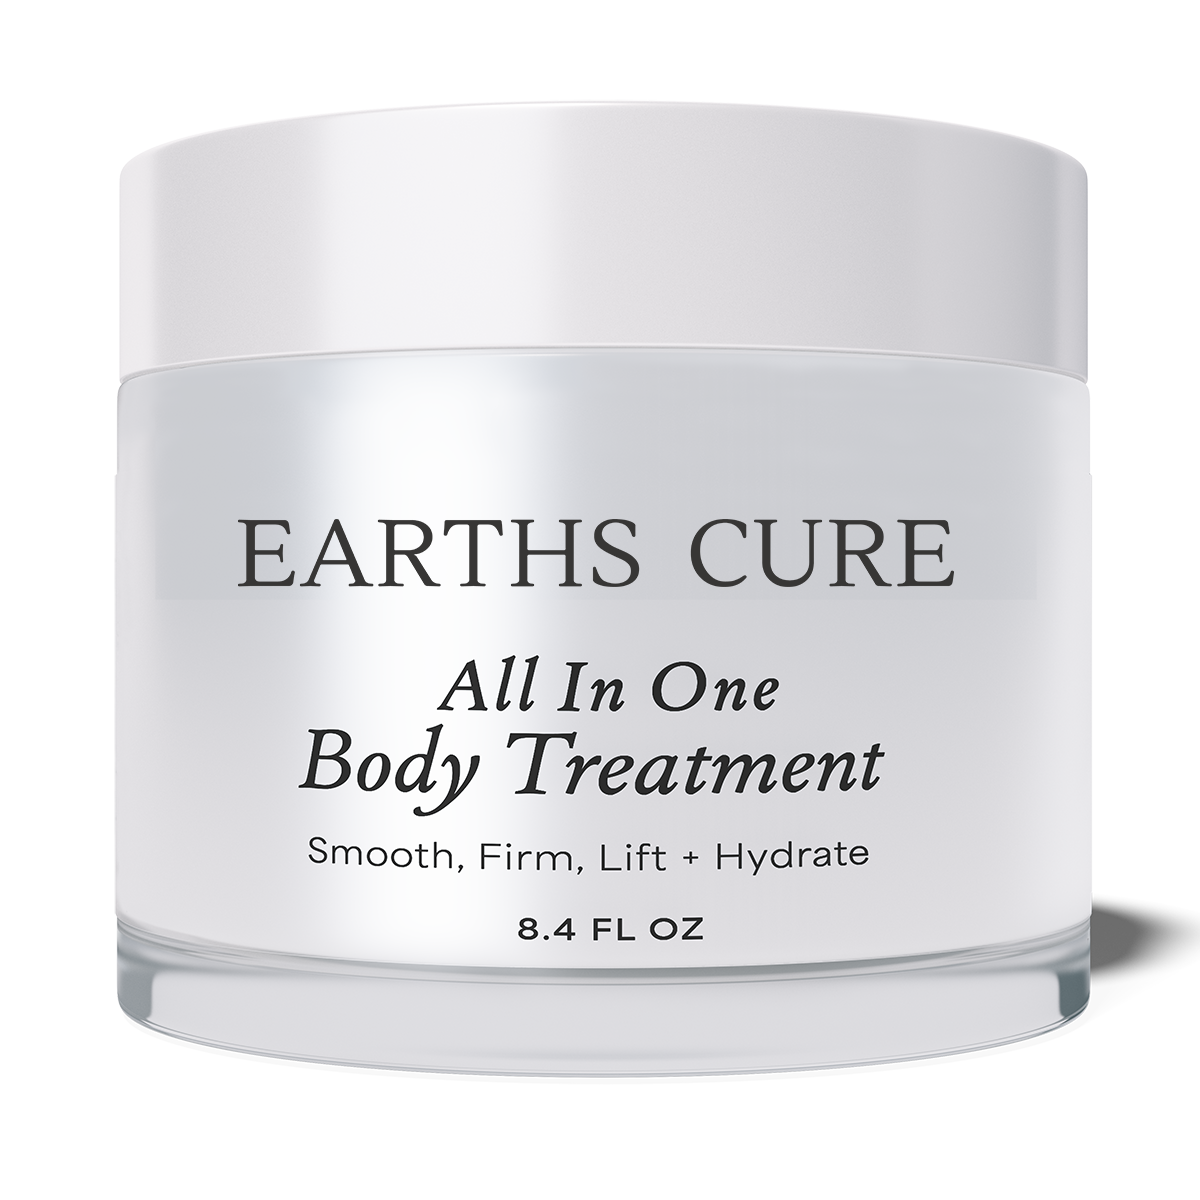 All-In-One Body Treatment